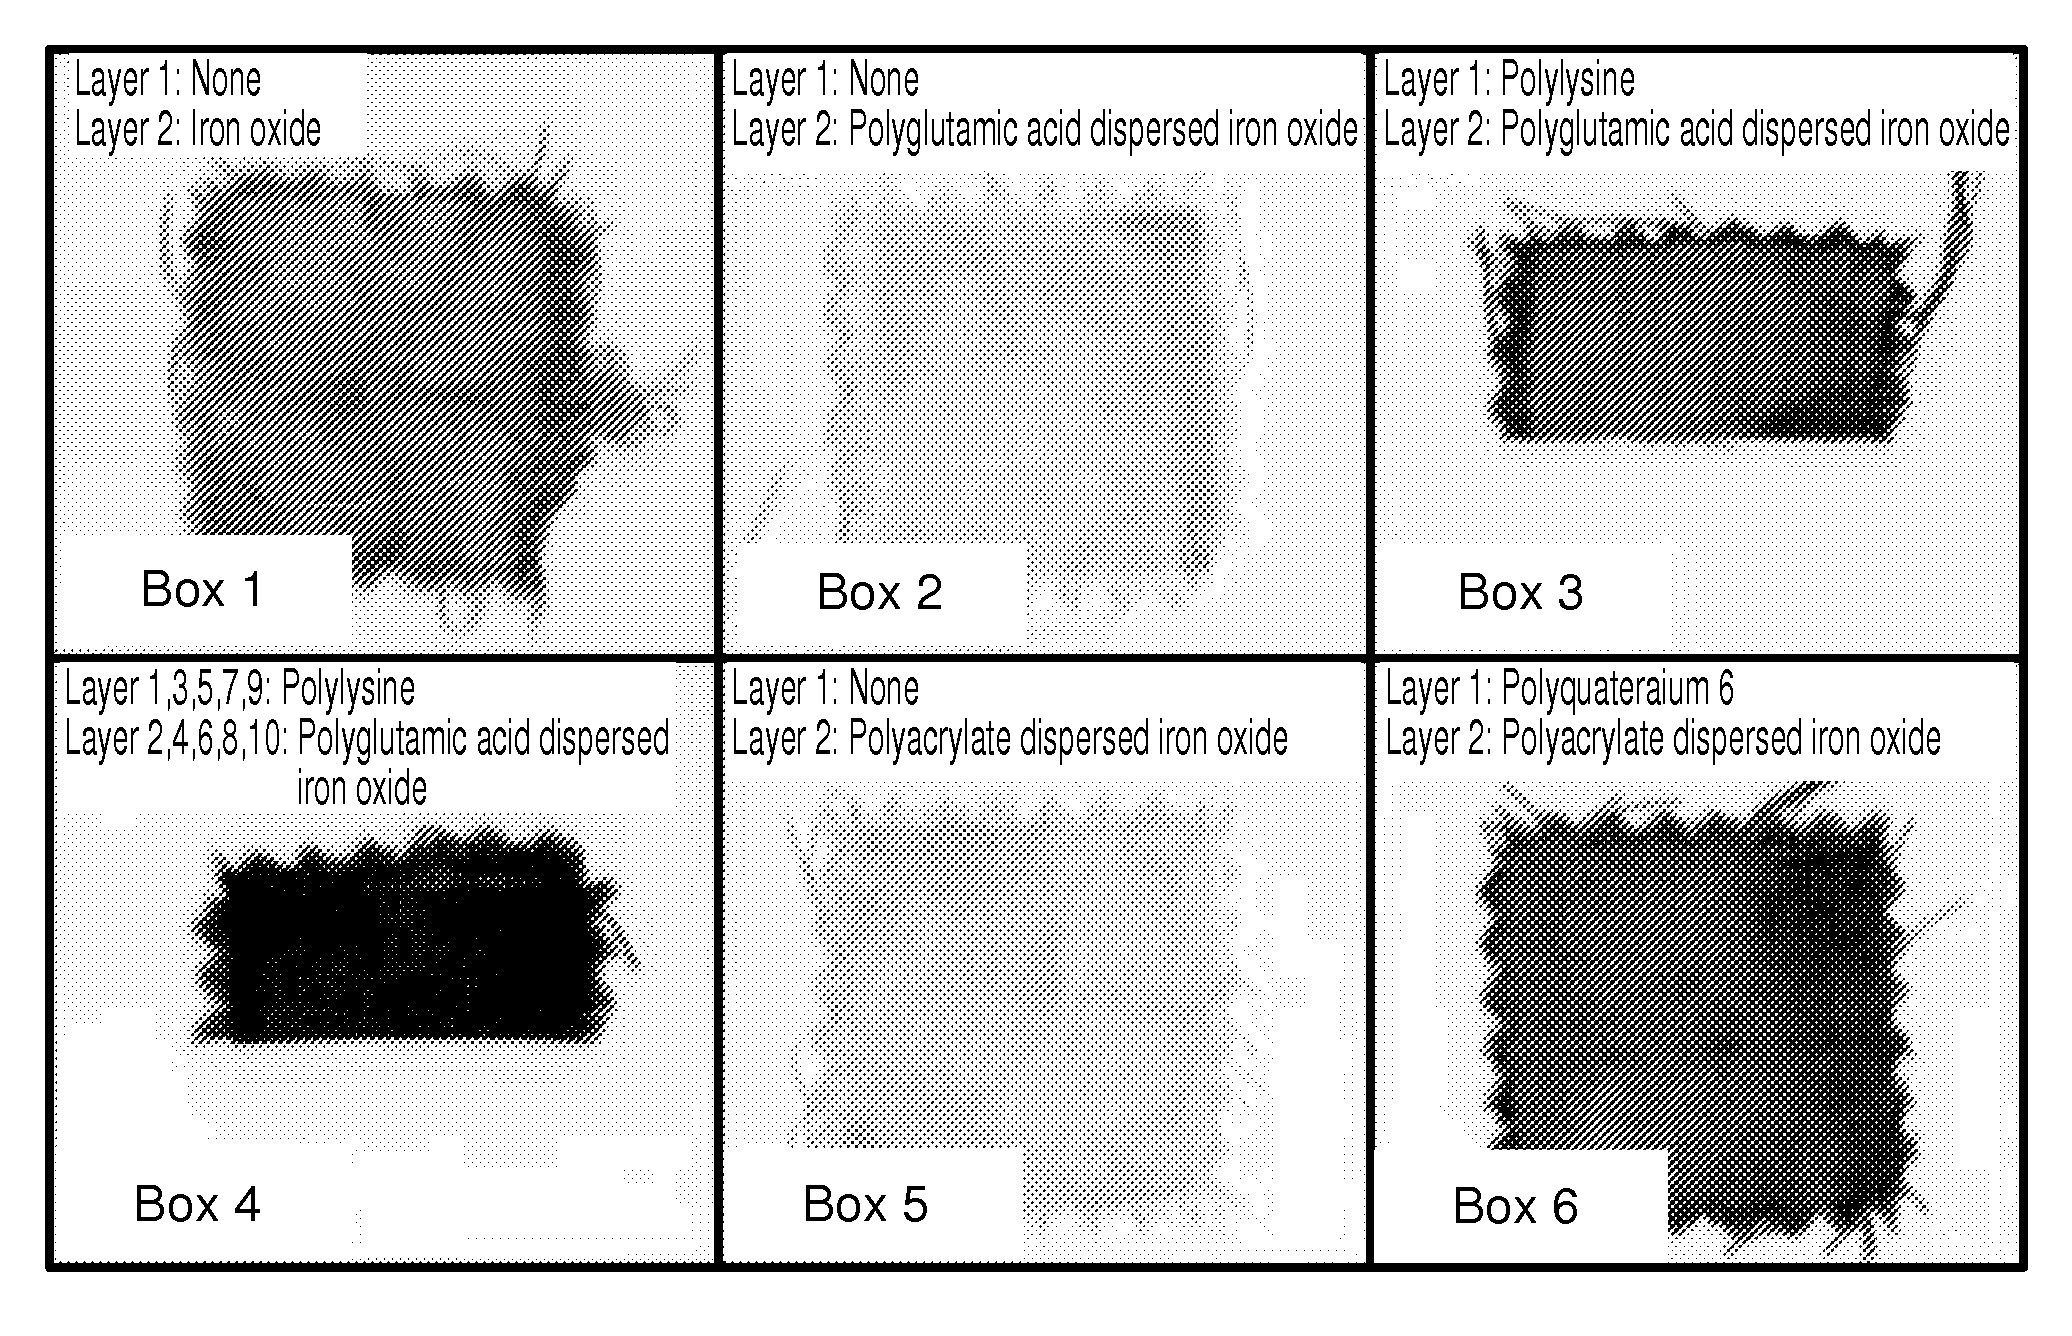 Method of depositing particulate benefit agents on keratin-containing substrates